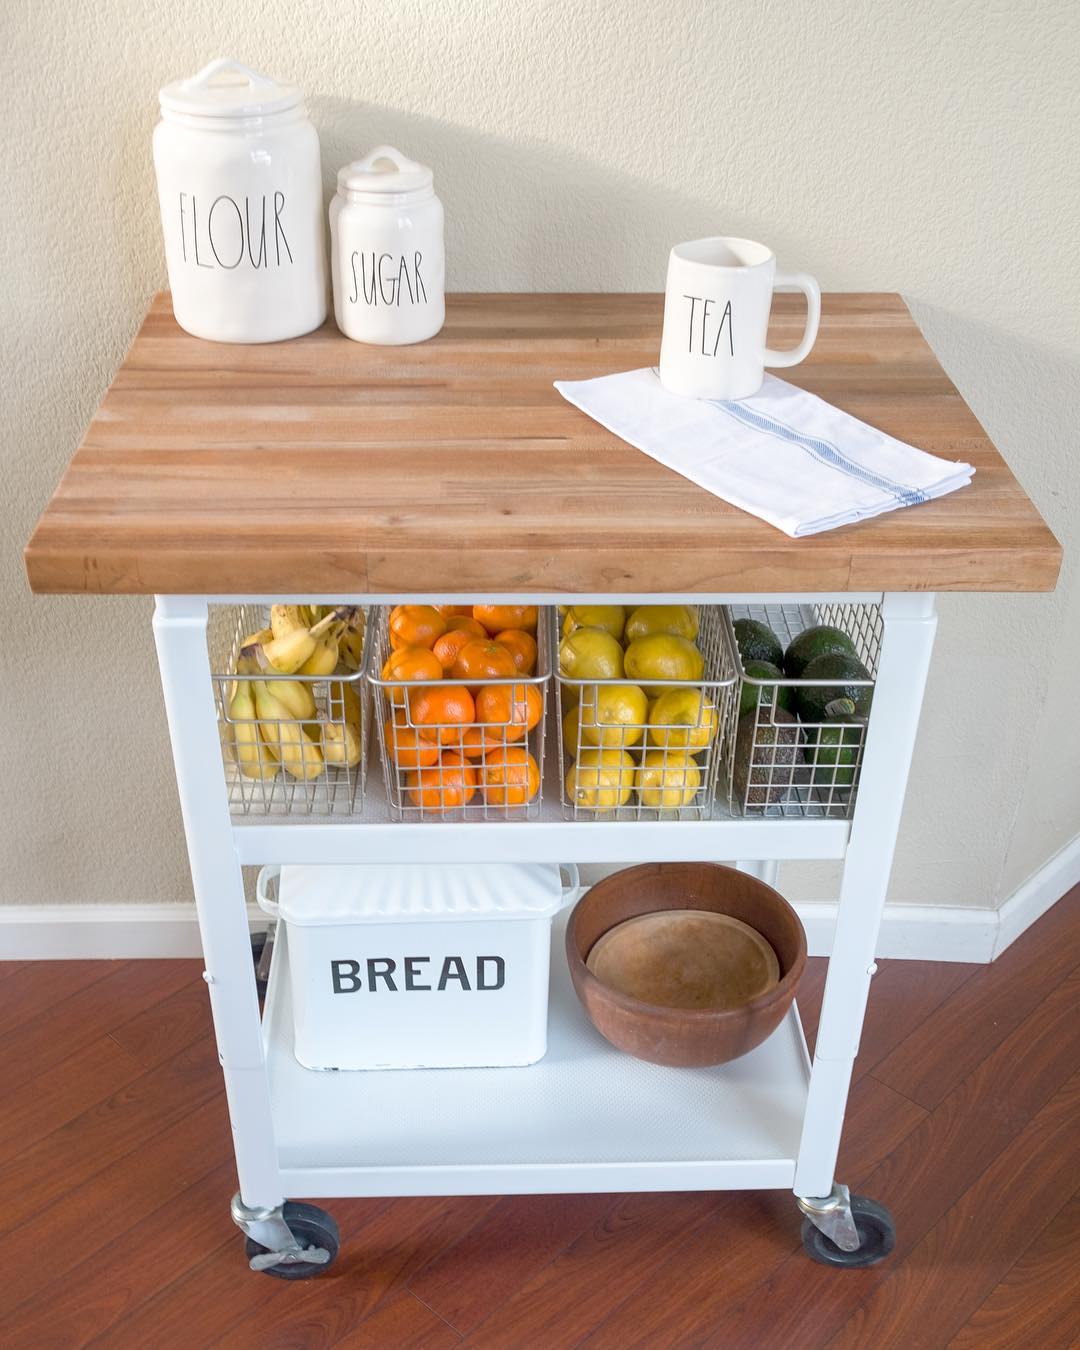 Small rolling kitchen cart for small apartment use. Photo by Instagram user @bloomsandboxwood